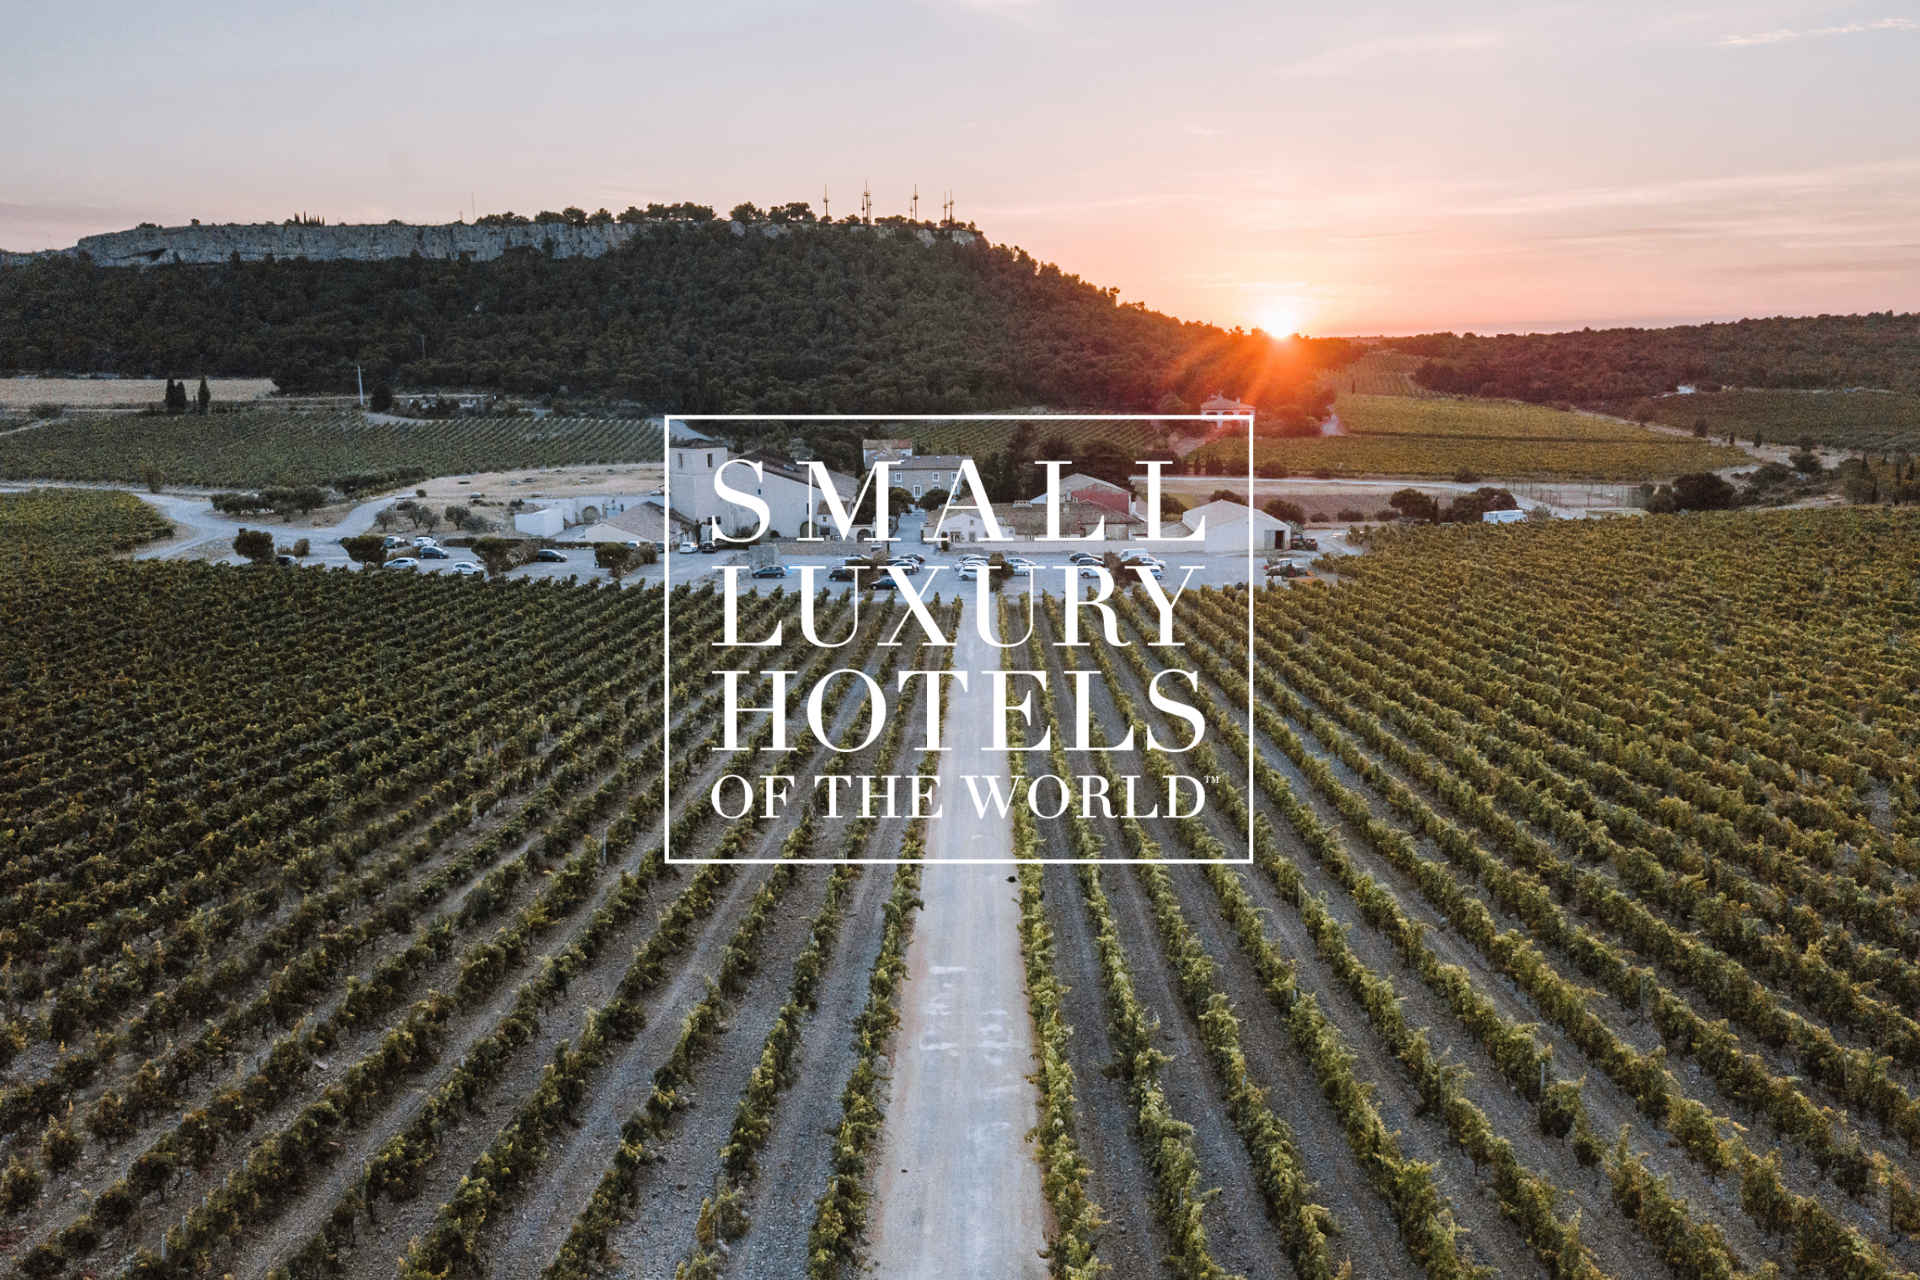 Le Château l'Hospitalet Wine Resort, Beach & Spa rejoint le groupe Small Luxury Hotels